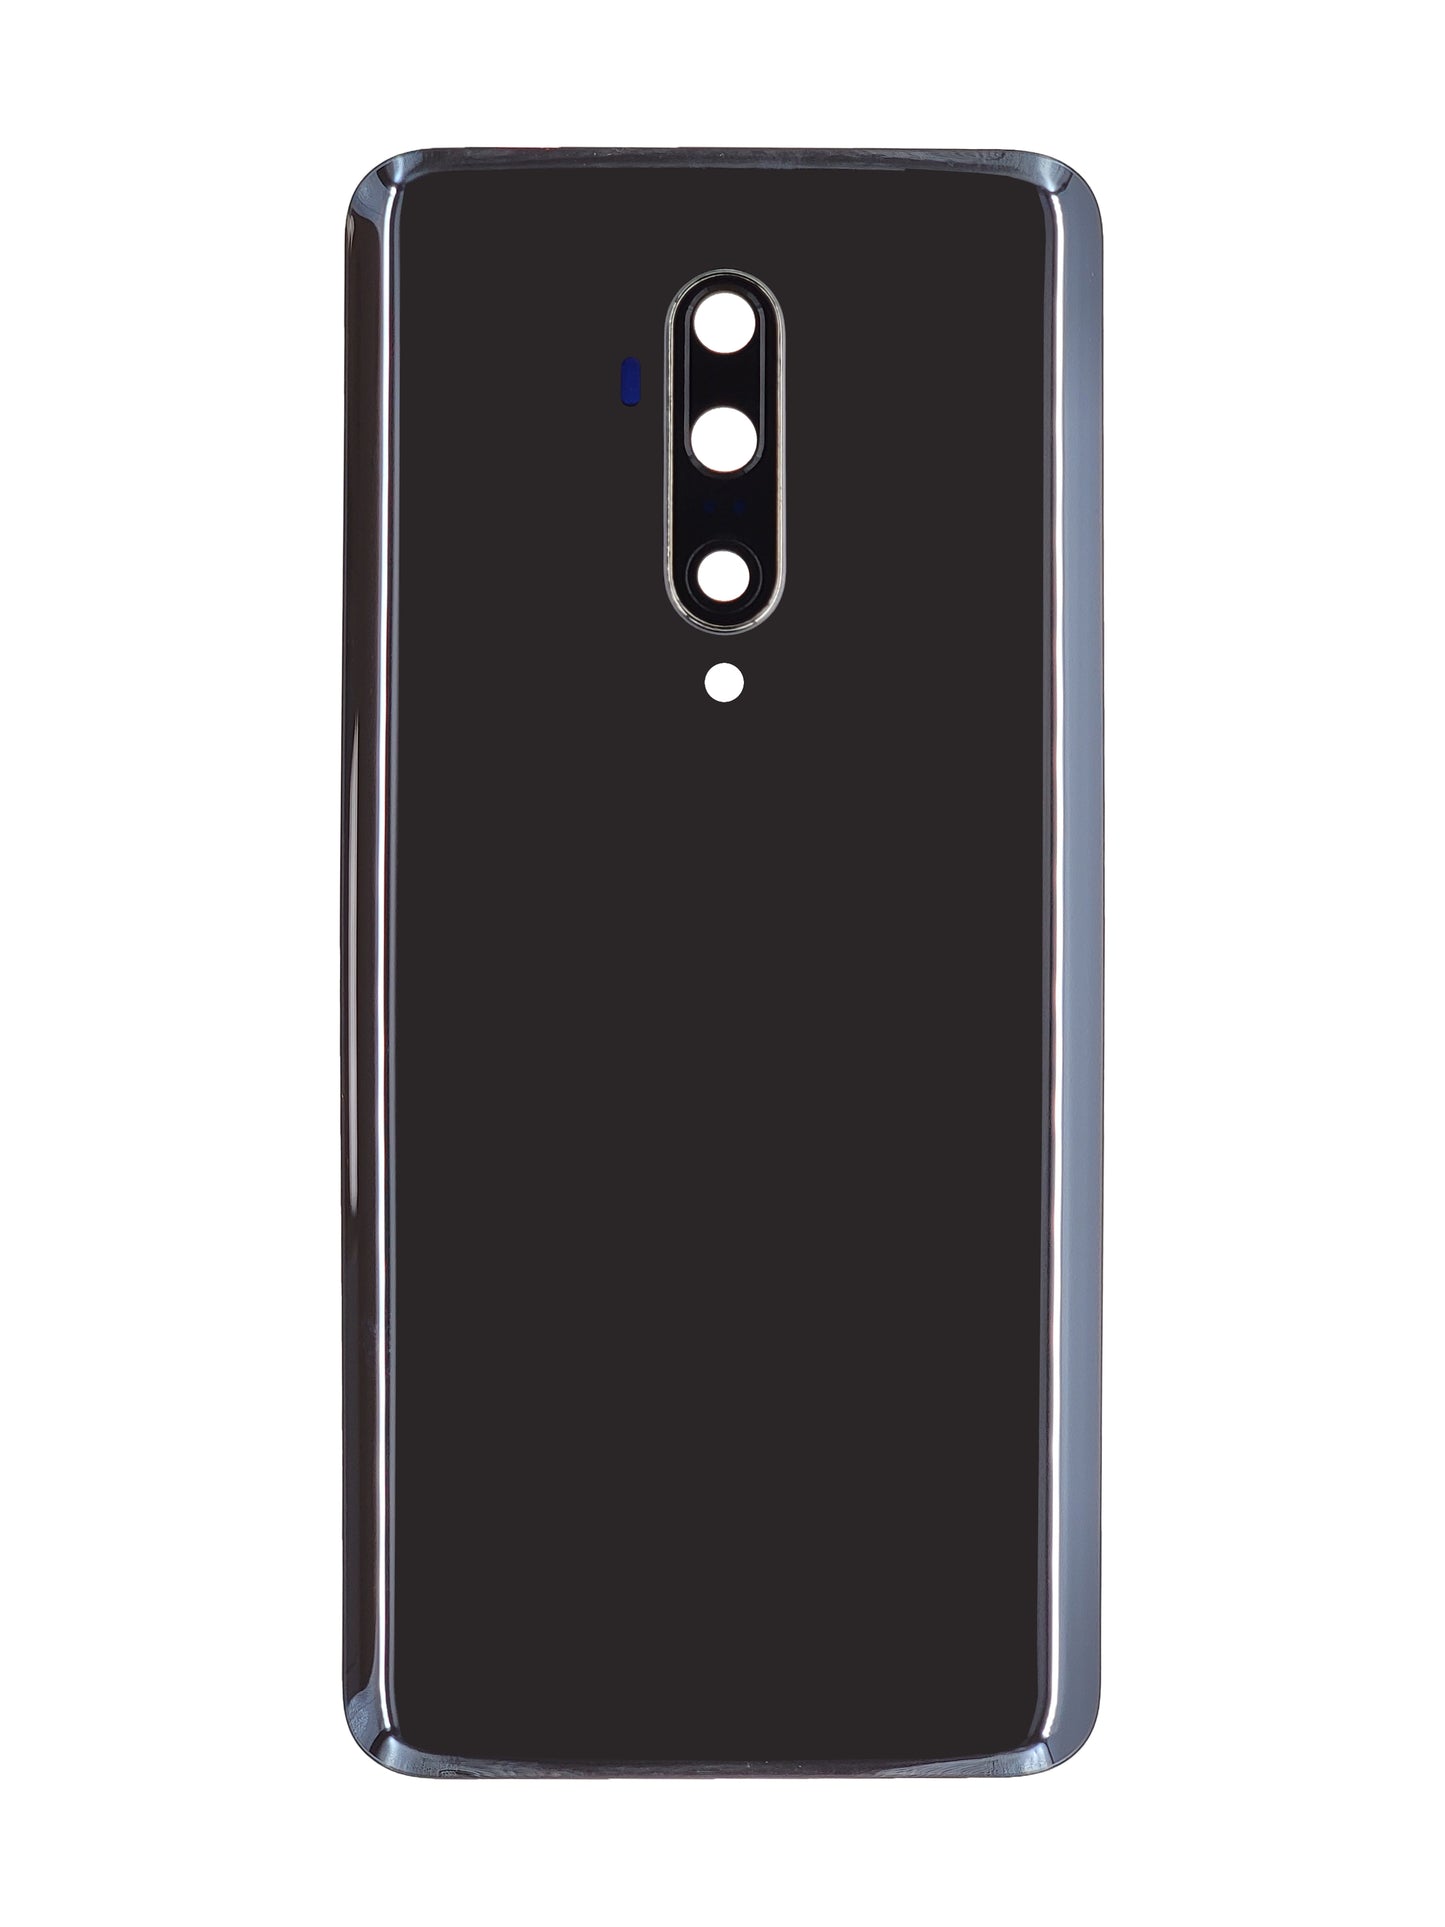 OPS 1+7 Pro Back Cover (Mirror Gray)